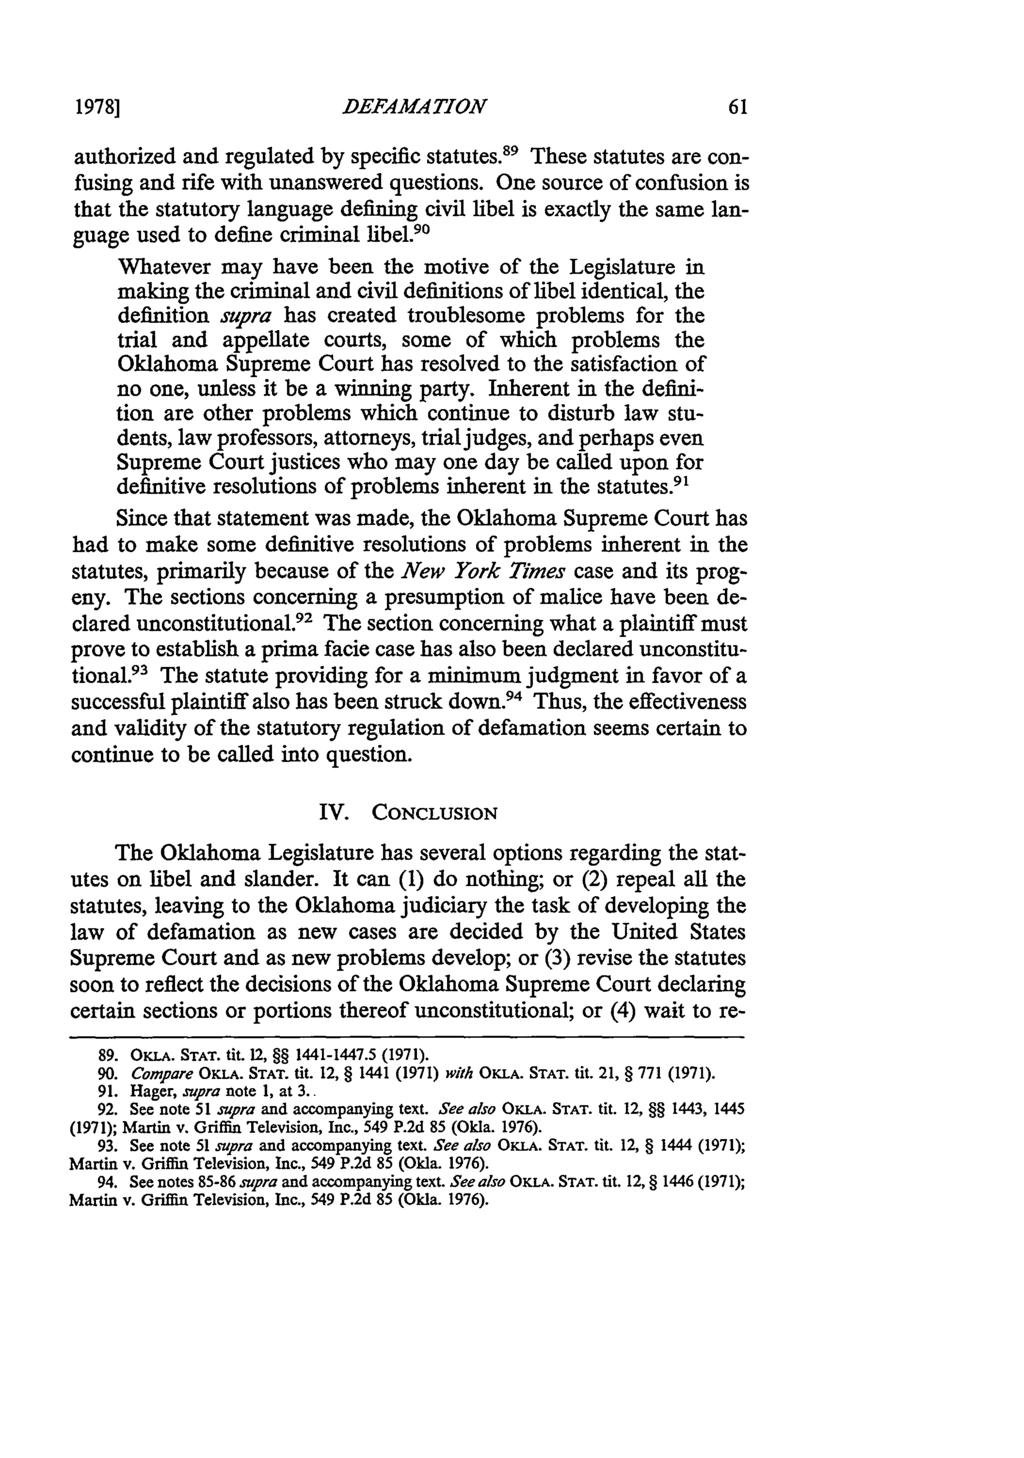 Tulsa Law Review, Vol. 14 [1978], Iss. 1, Art. 2 1978] DEFA4MATION authorized and regulated by specific statutes. 8 9 These statutes are confusing and rife with unanswered questions.